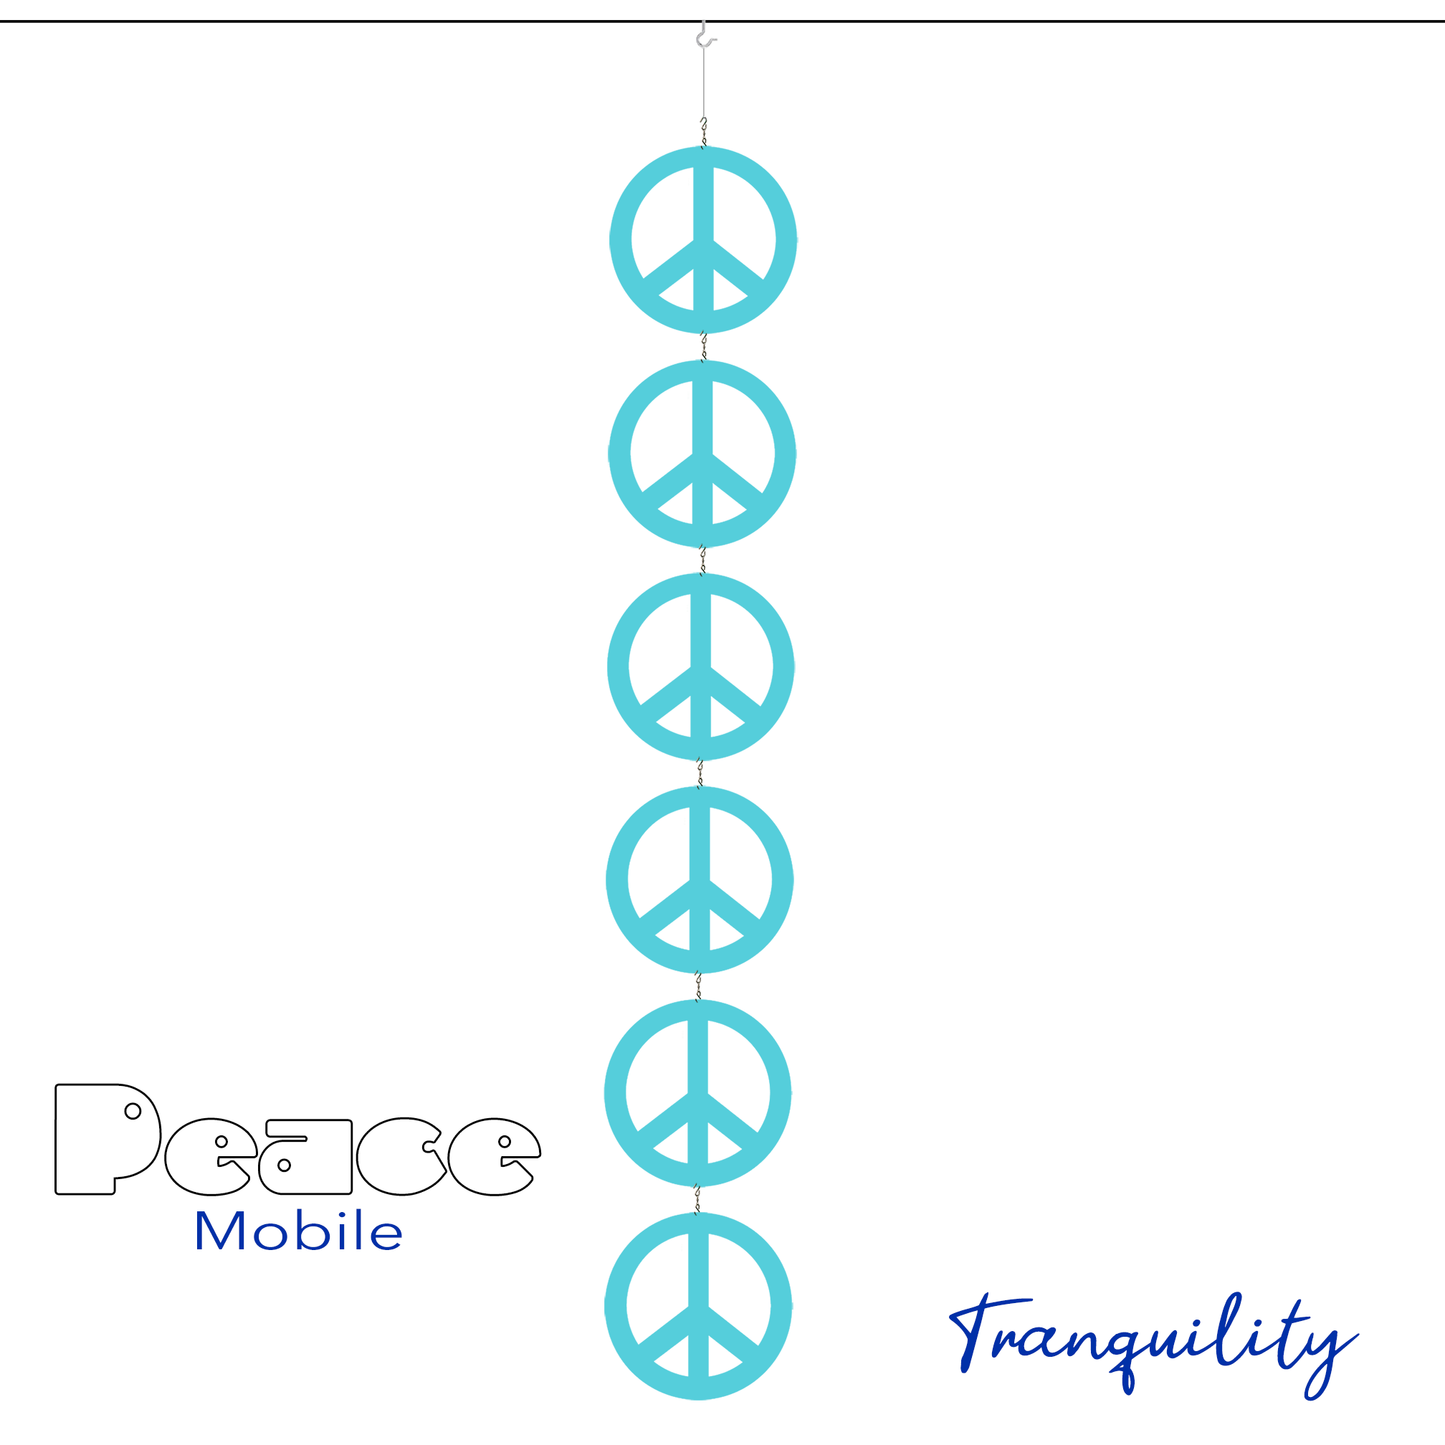 Tranquility Peace Mobile - 6 Peace signs in aqua blue - kinetic hanging art mobile symbolizes World Peace - by AtomicMobiles.com